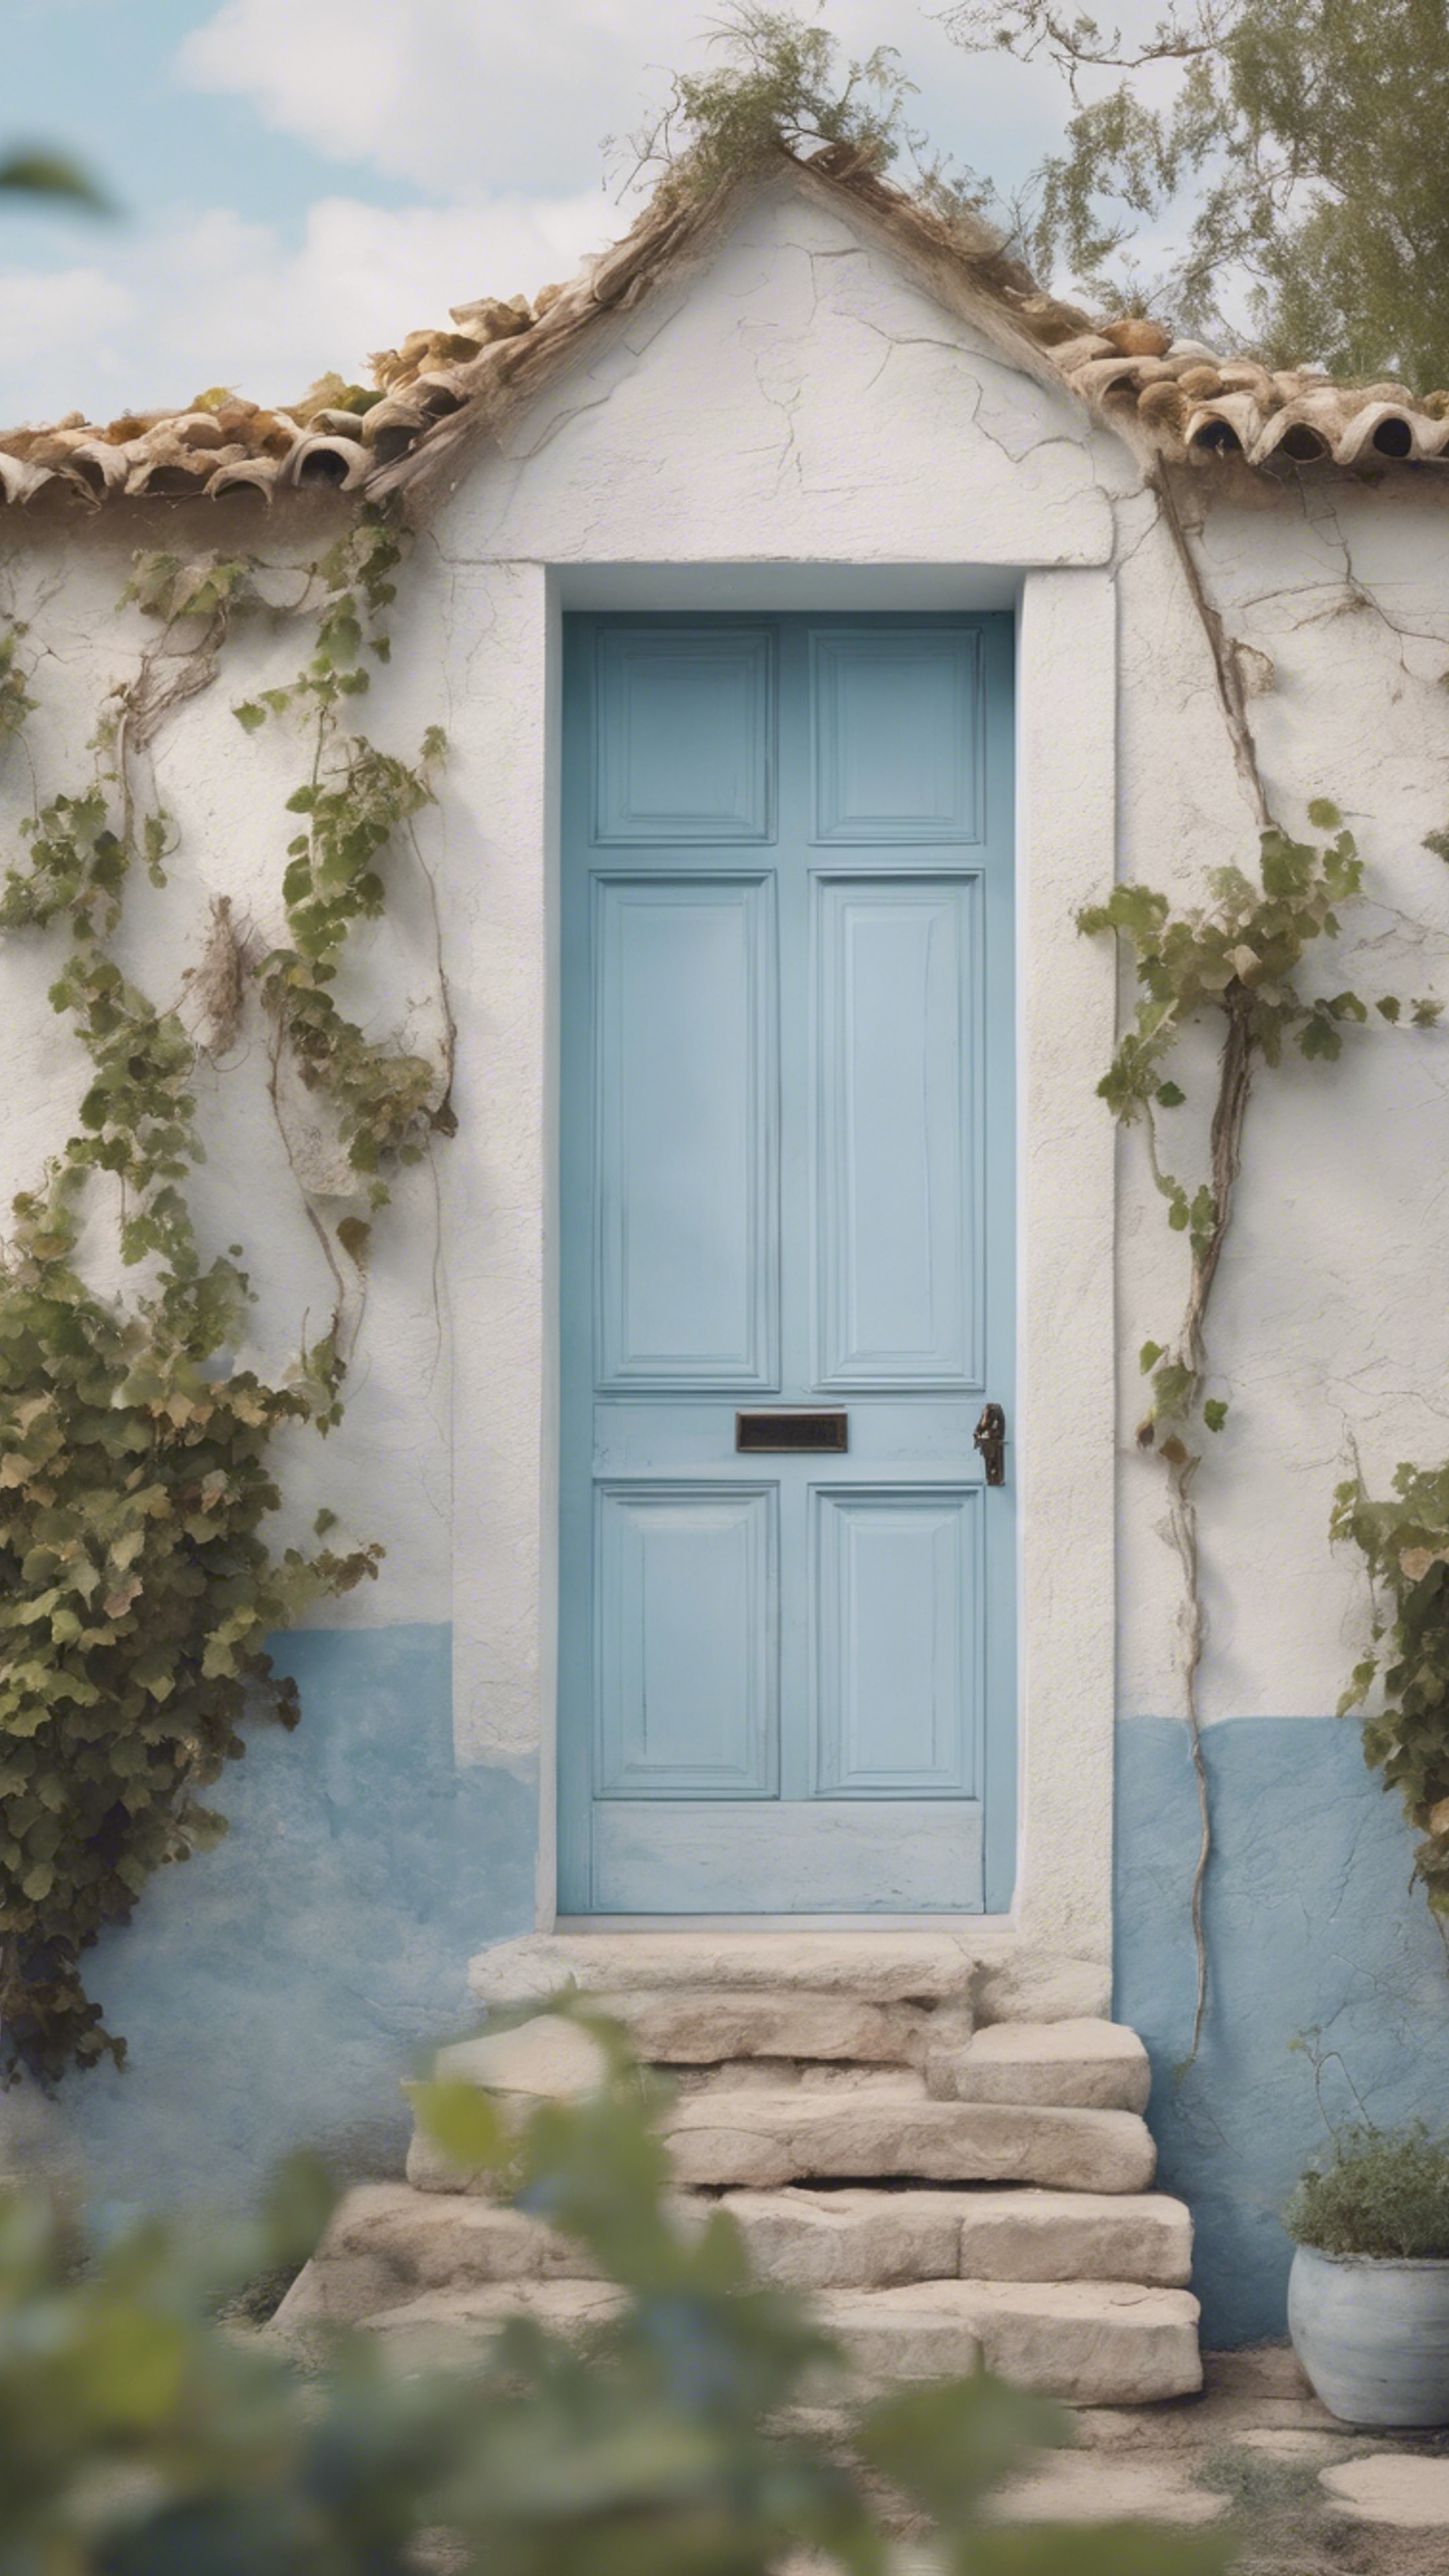 A pastel blue painted door on a rustic white house, a vineyard in the background.壁紙[5cba61123f91494ab86f]